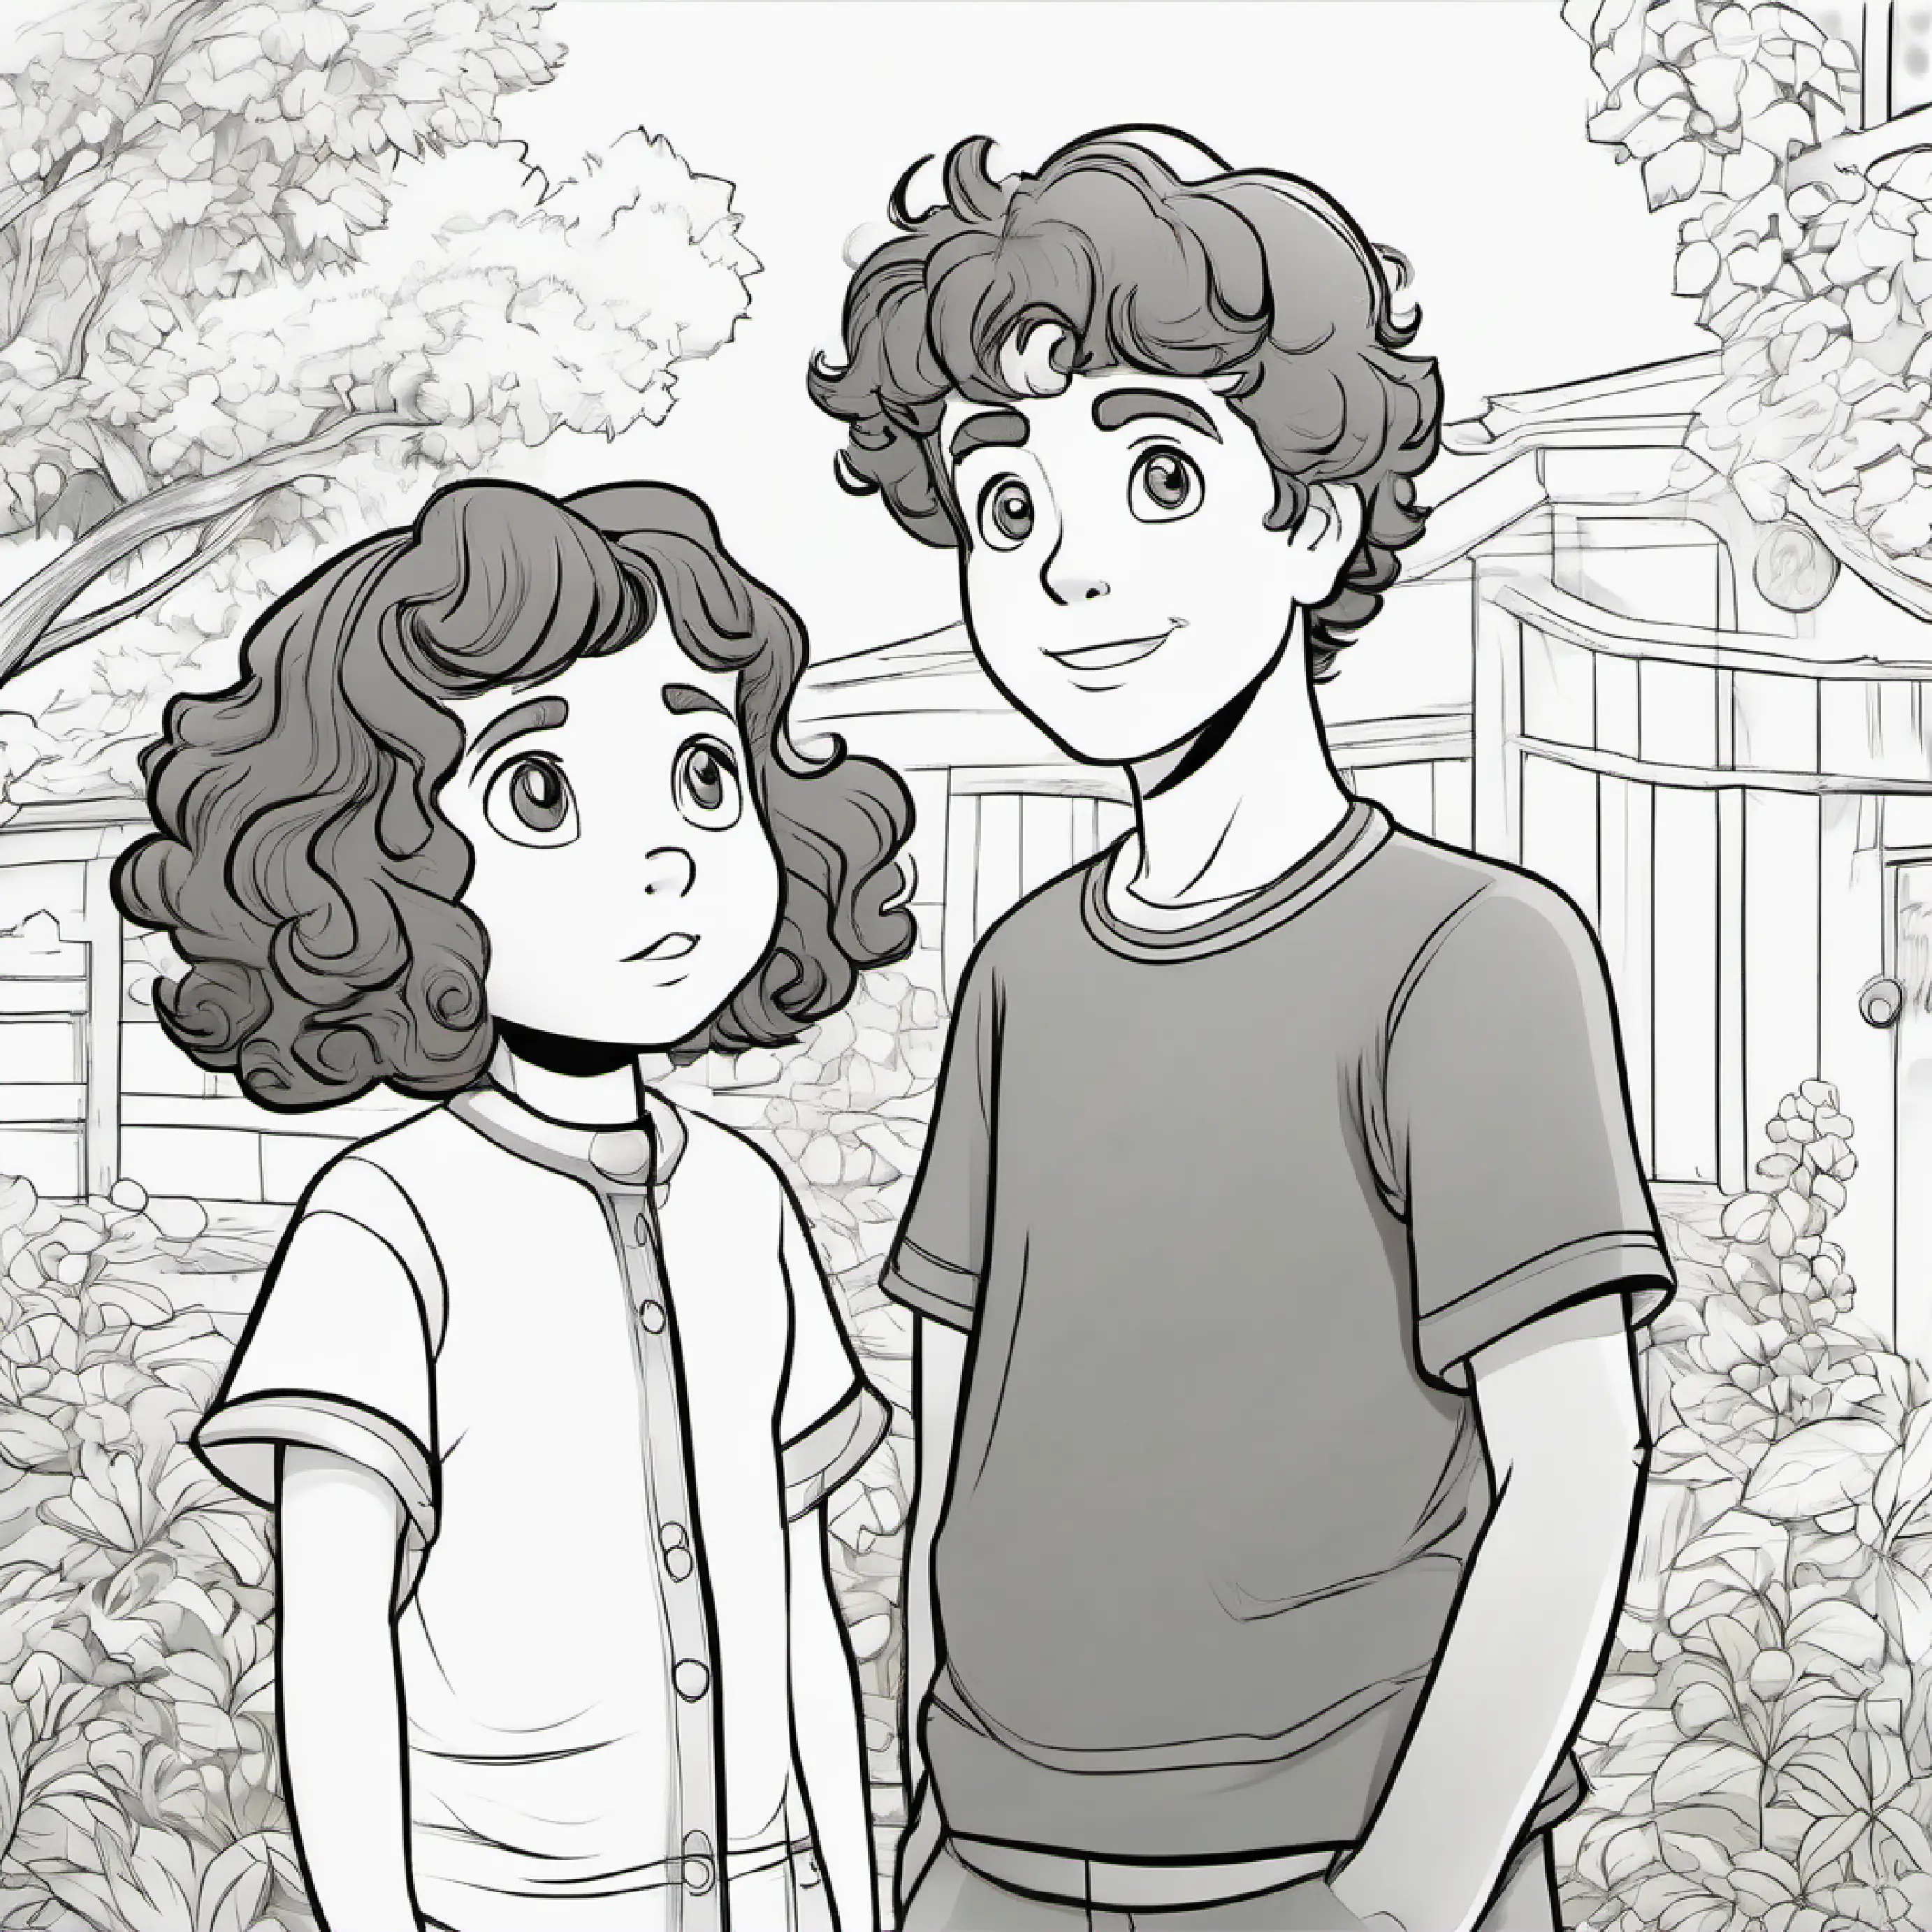 Little girl with bright green eyes and curly brown hair approaches and speaks to the boy, showing concern.